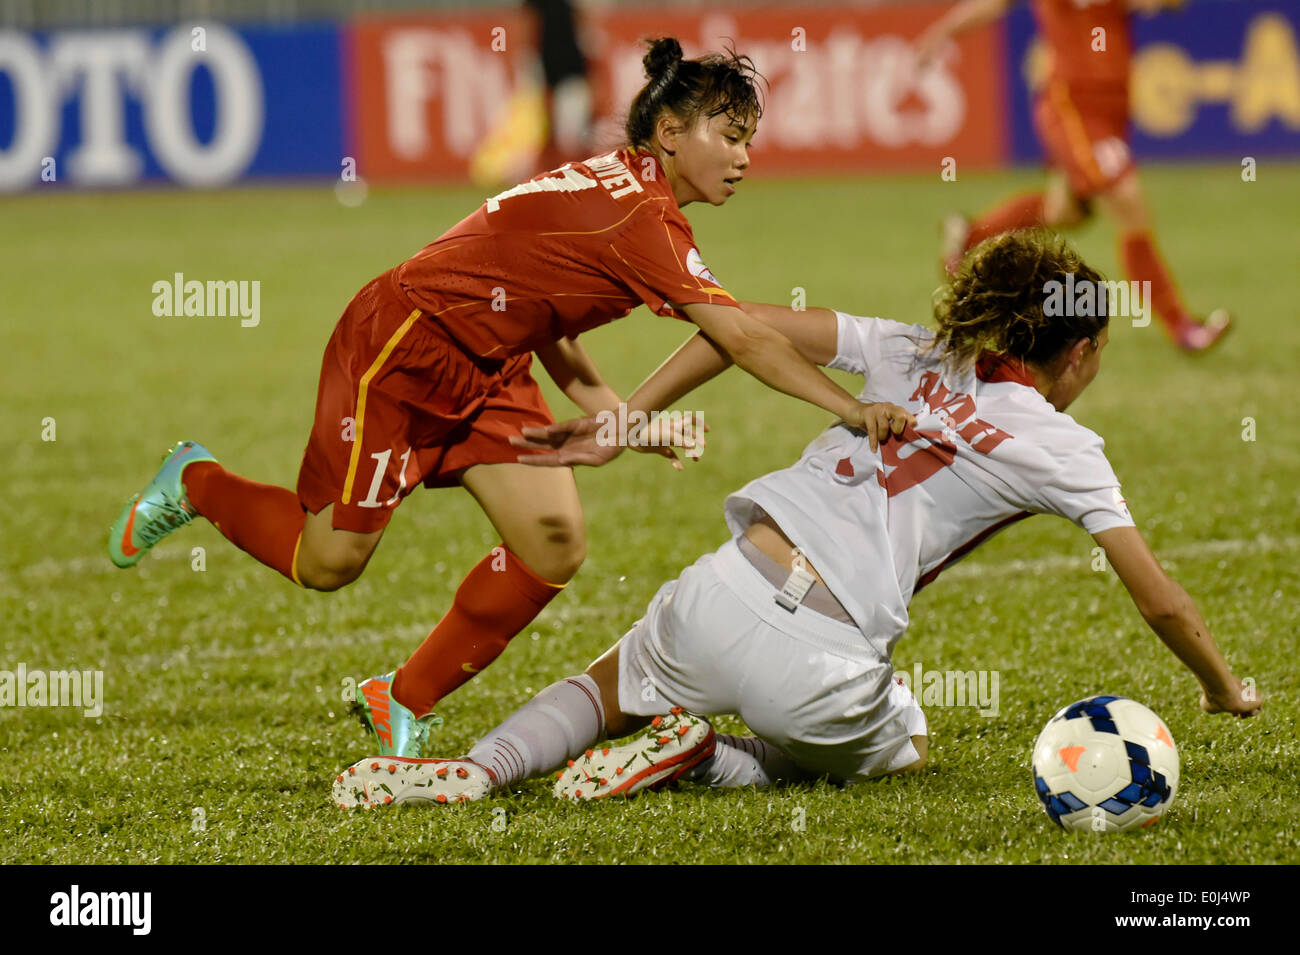 Ho Chi Minh City, Vietnam. 14th May, 2014. Vietnam's Nguyen Thi Nguyet (L) vies for the ball during the Group A match against Jordan at the 2014 AFC Women's Asian Cup held at Thong Nhat Stadium in Ho Chi Minh city, Vietnam, May 14, 2014. Vietnam beat Jordan 3-1. © He Jingjia/Xinhua/Alamy Live News Stock Photo